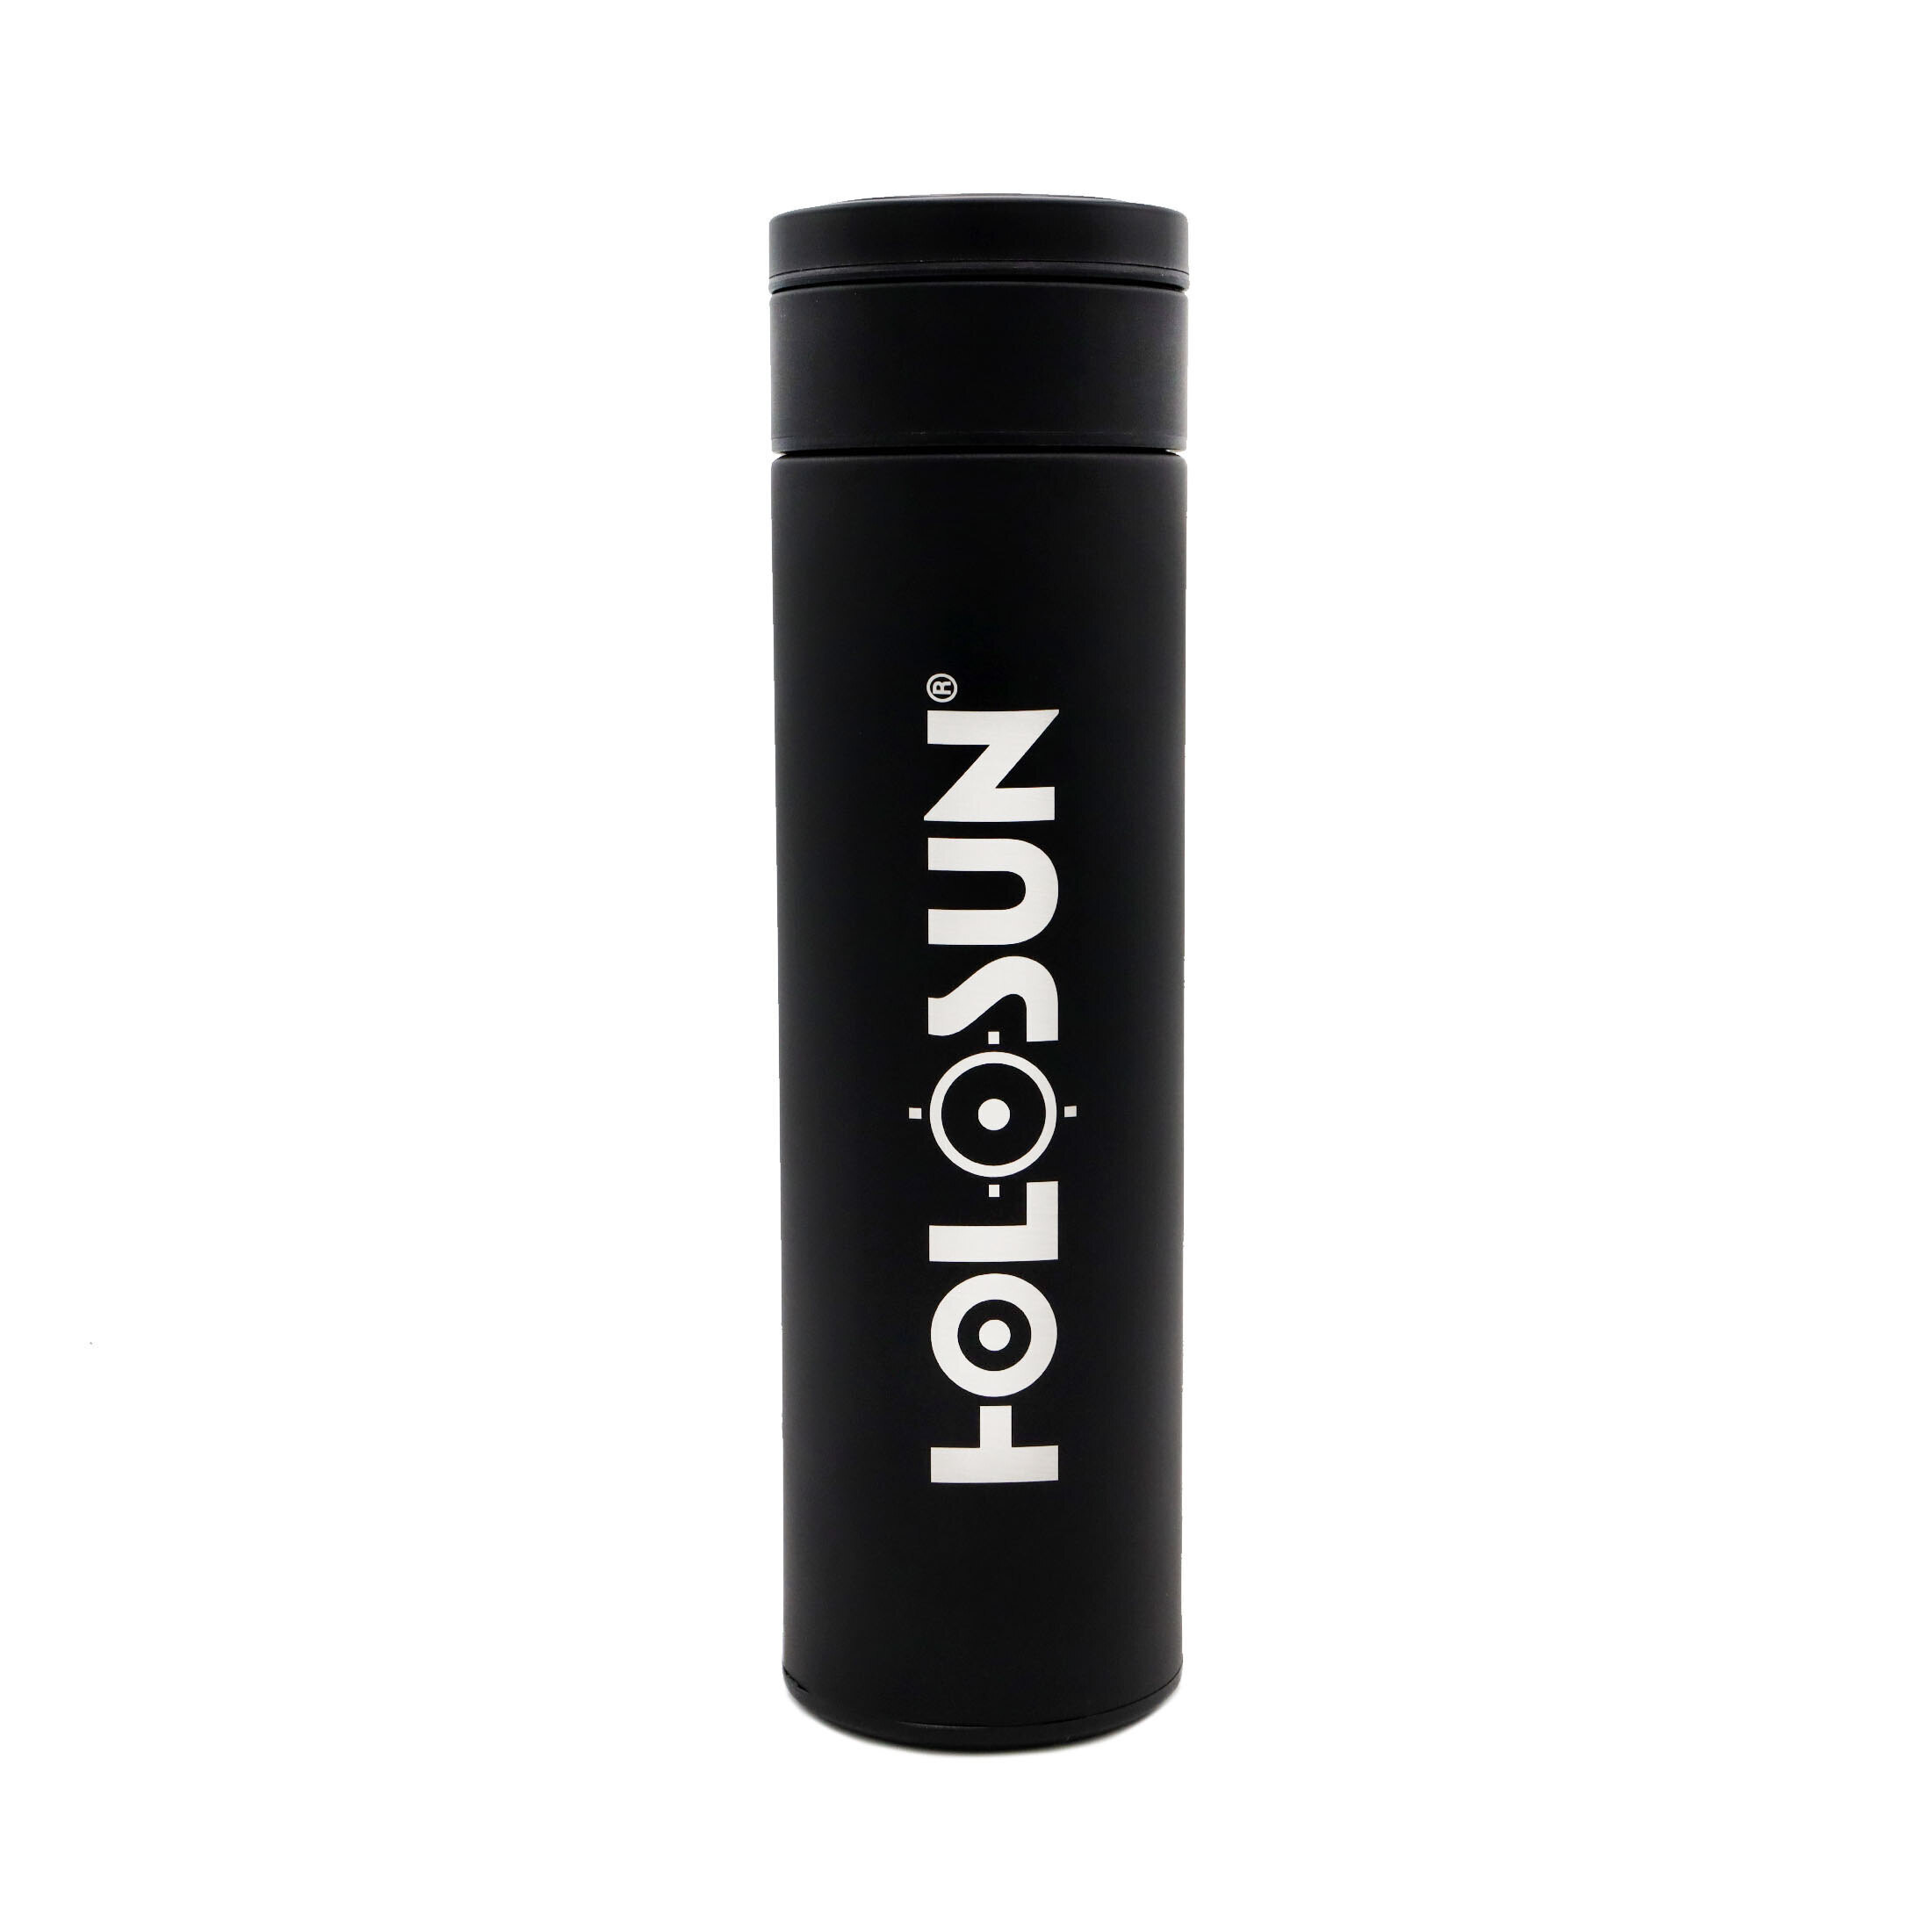 Holosun Merchandise HS-THERMOBOTTLE